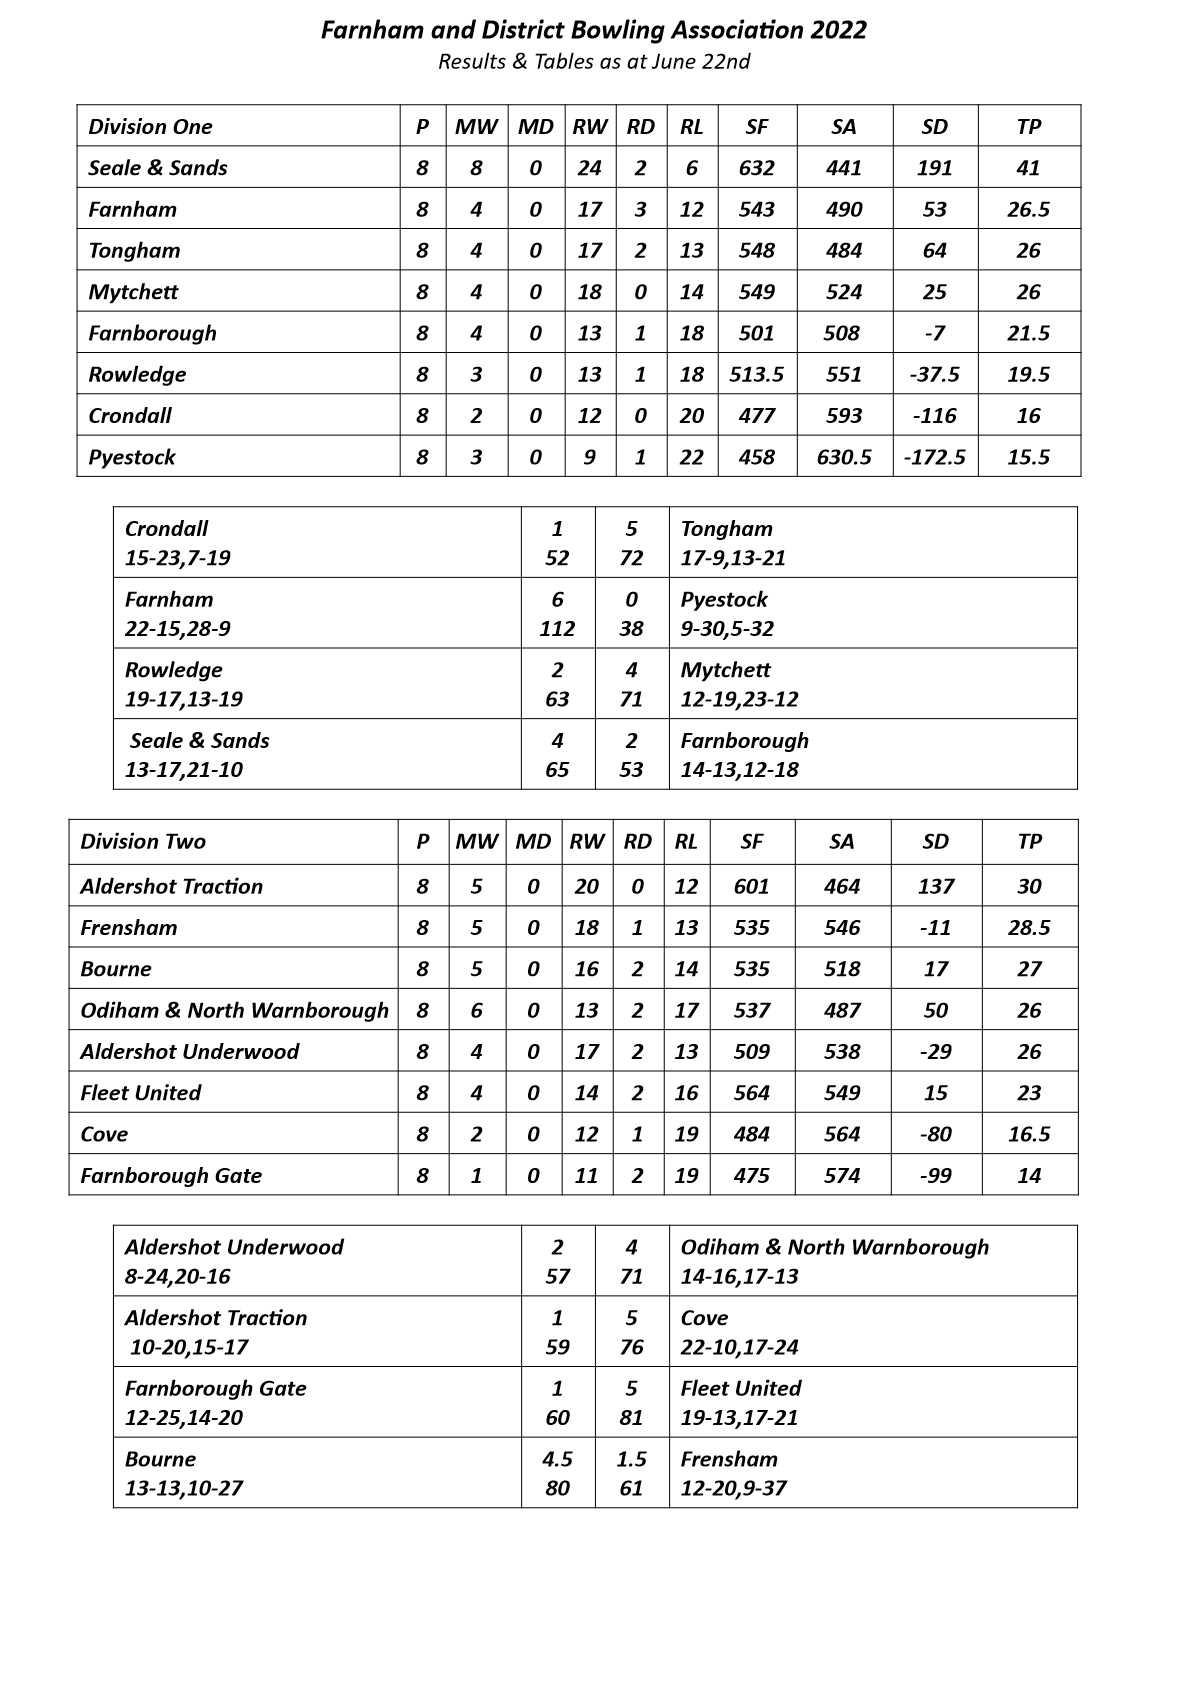  Farnham&District Bowling Association  Tables & Results as at June 22nd